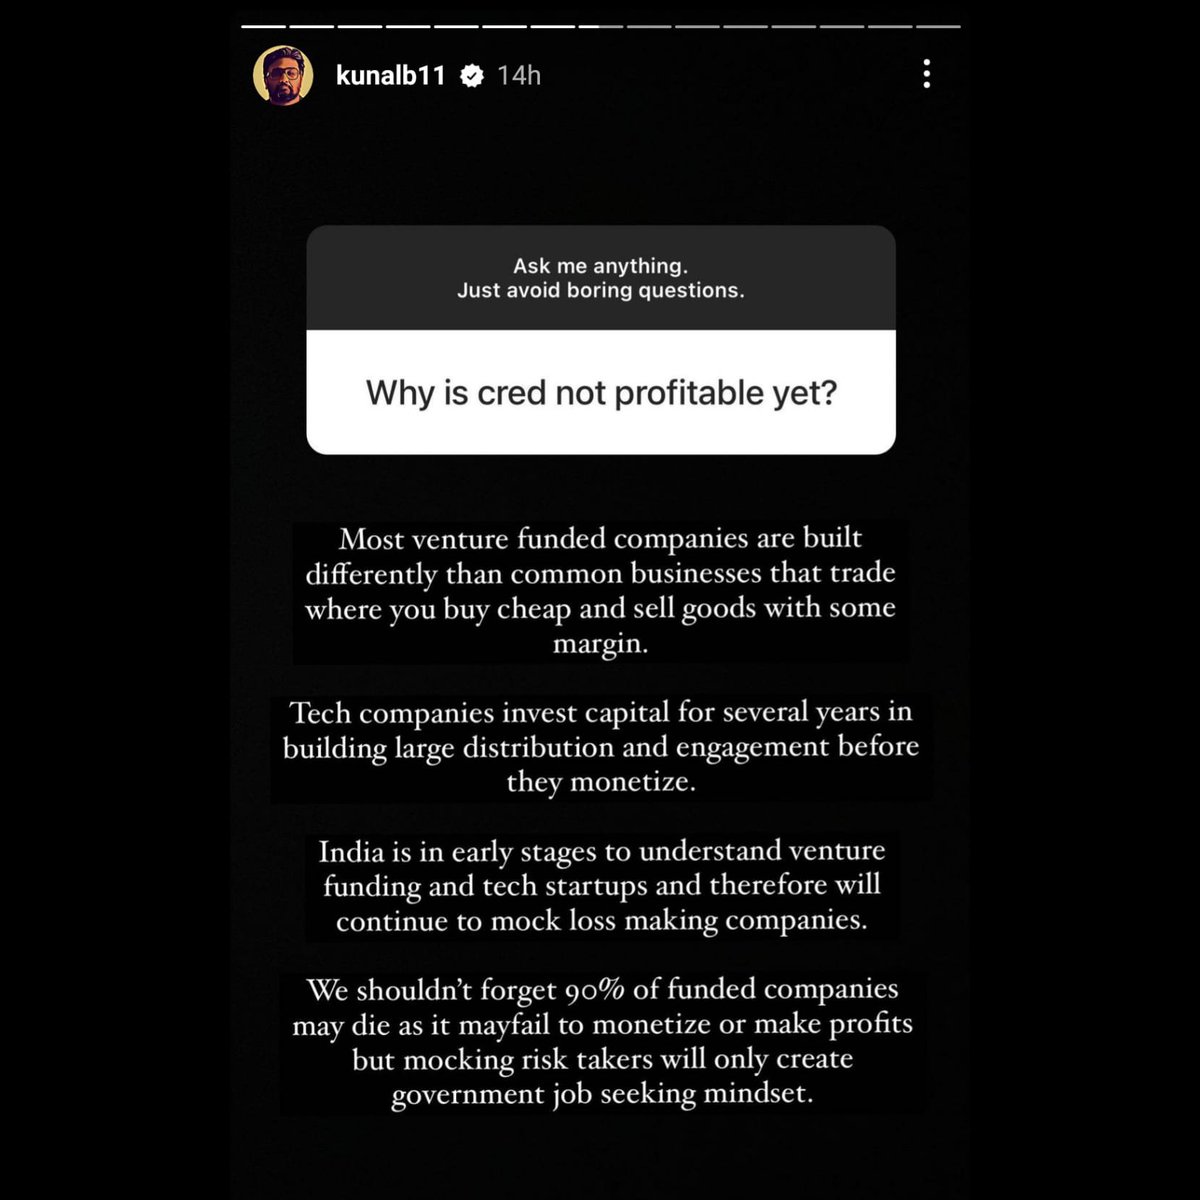 What are your thoughts on Kunal Shah's response?